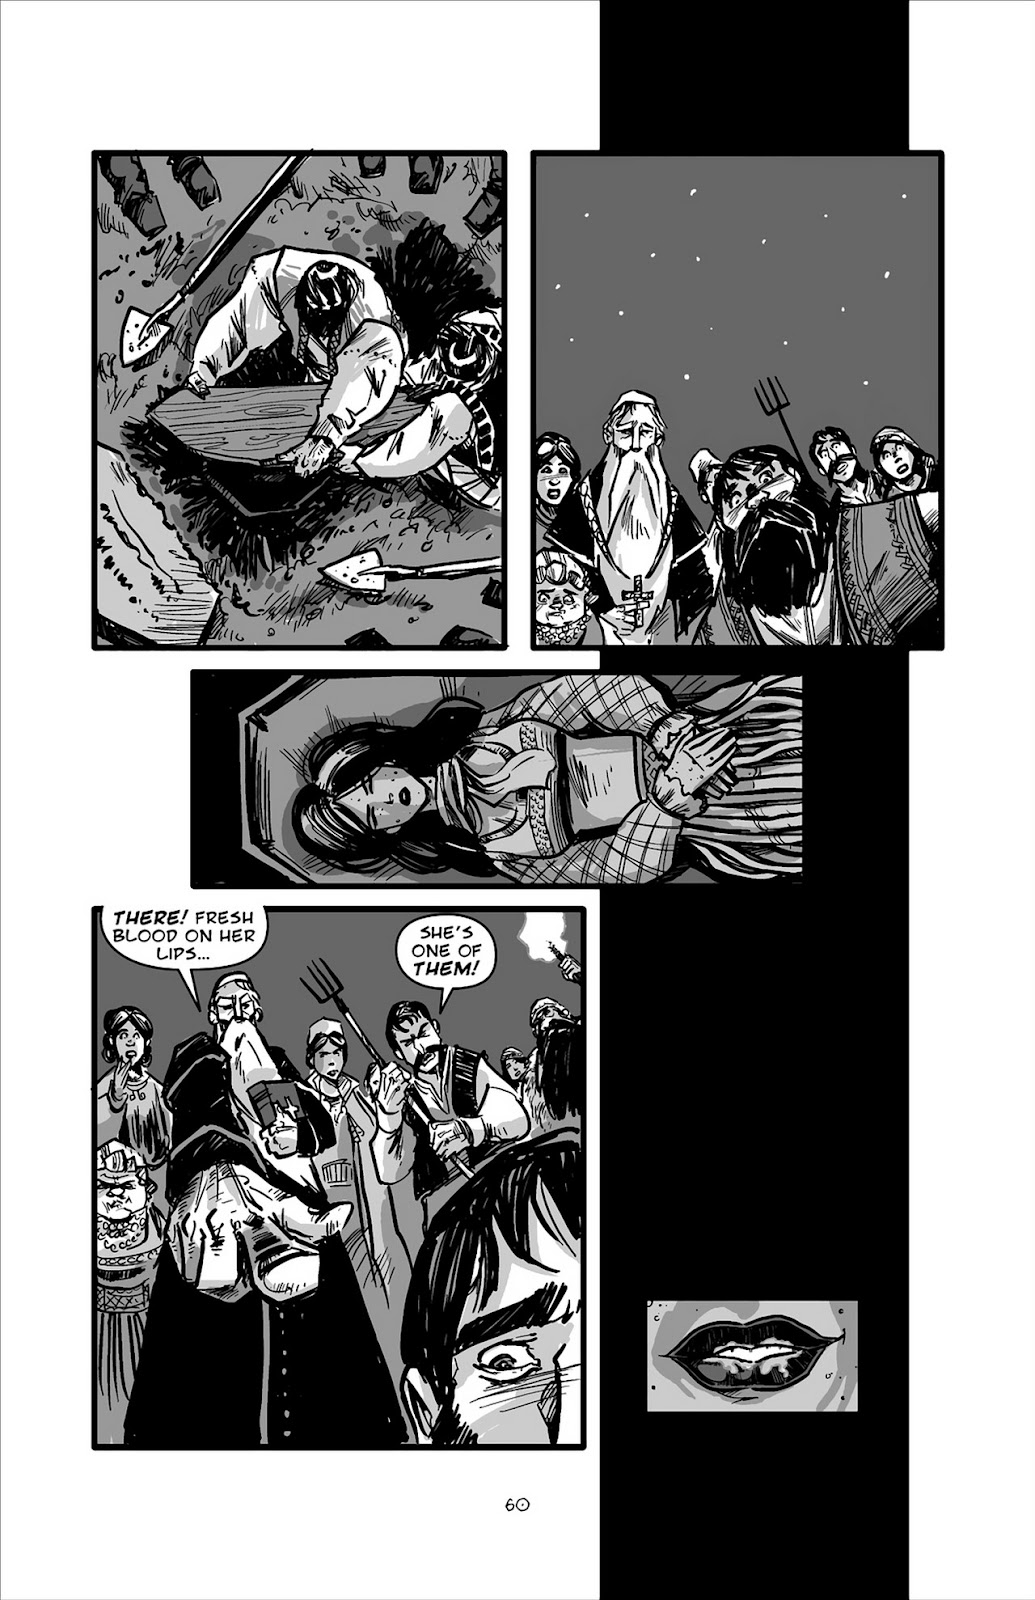 Pinocchio: Vampire Slayer - Of Wood and Blood issue 3 - Page 11